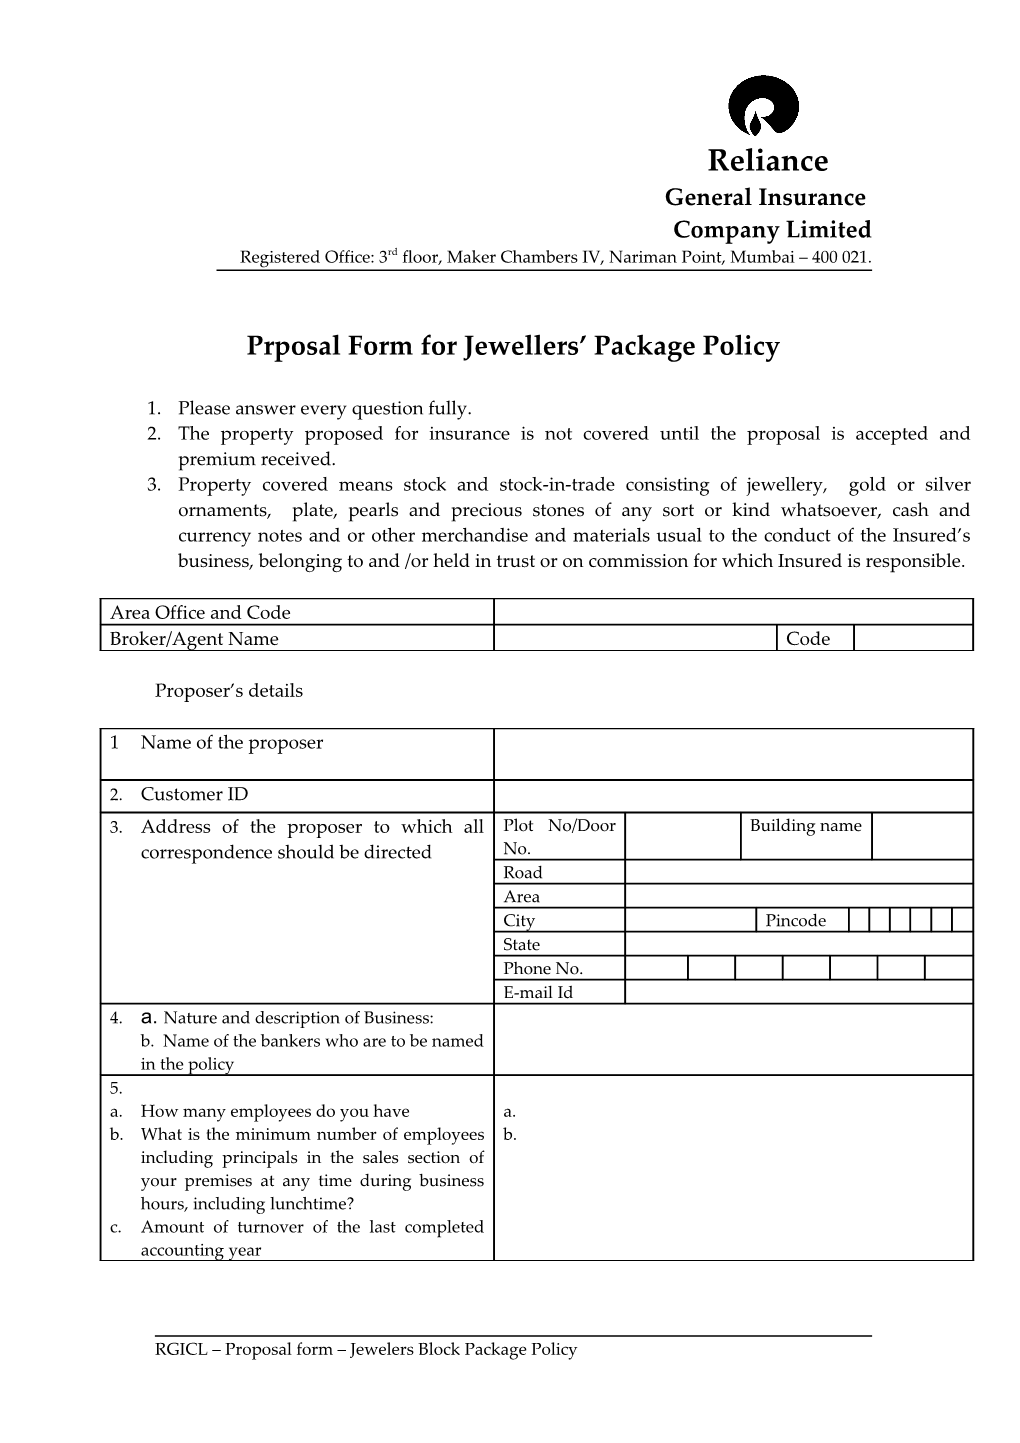 Prposal Form for Jewellers Package Policy